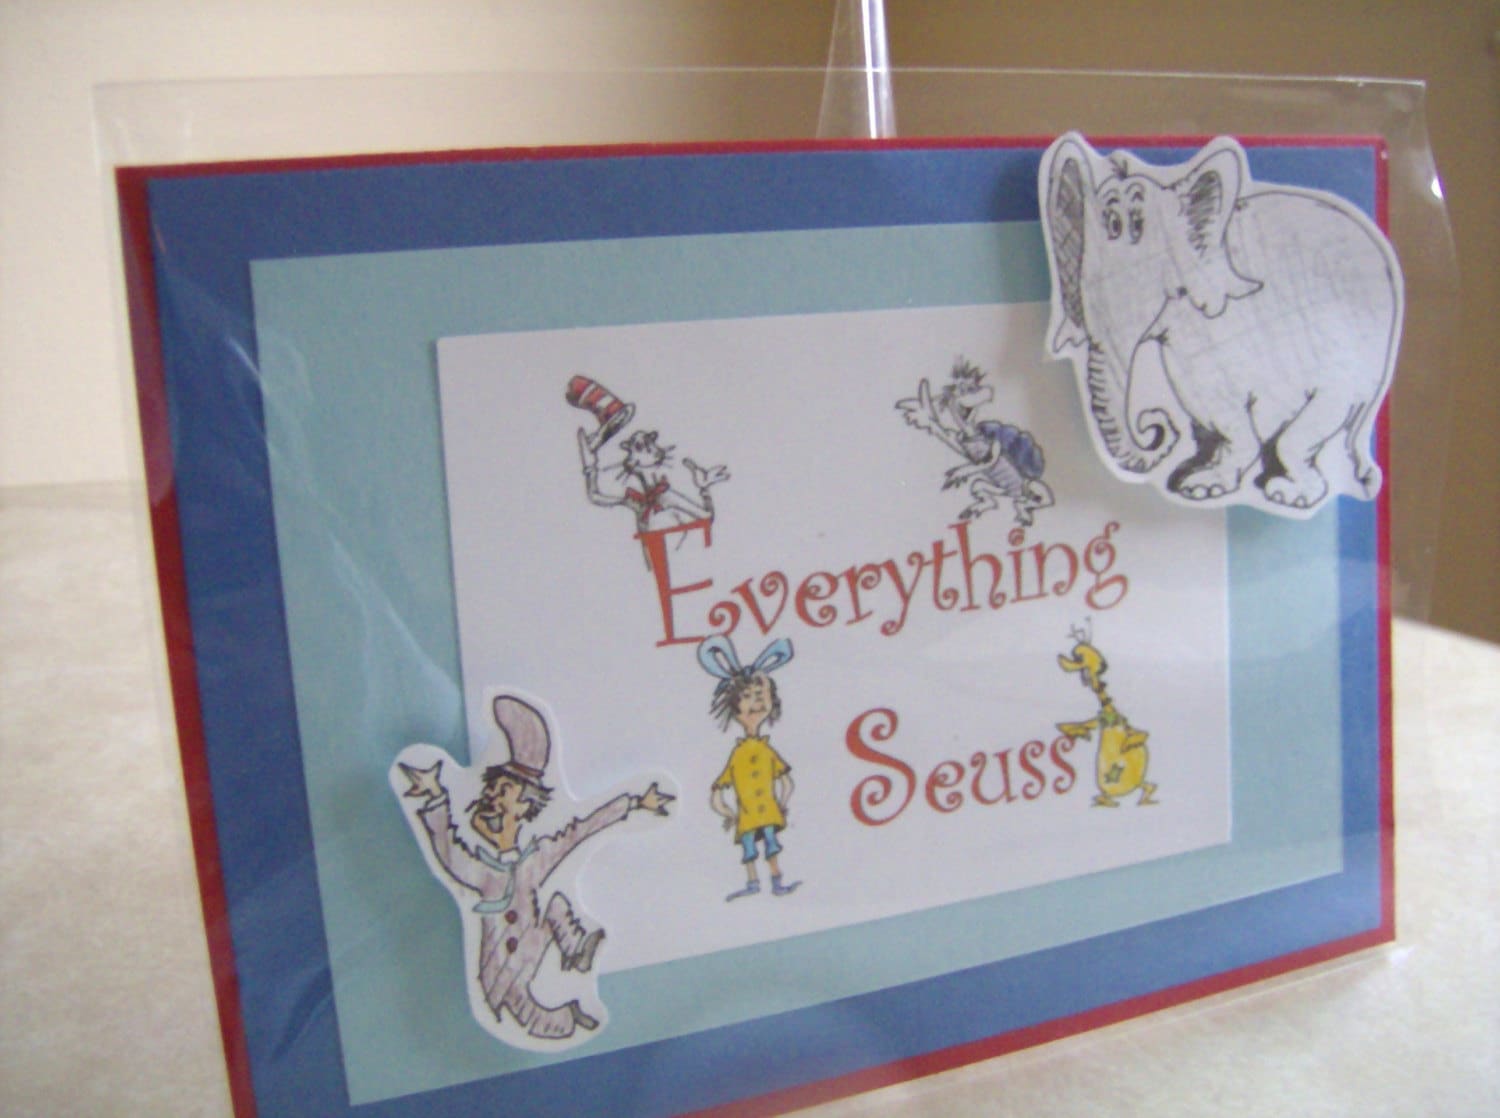 Dr Seuss Birthday Party Decorations